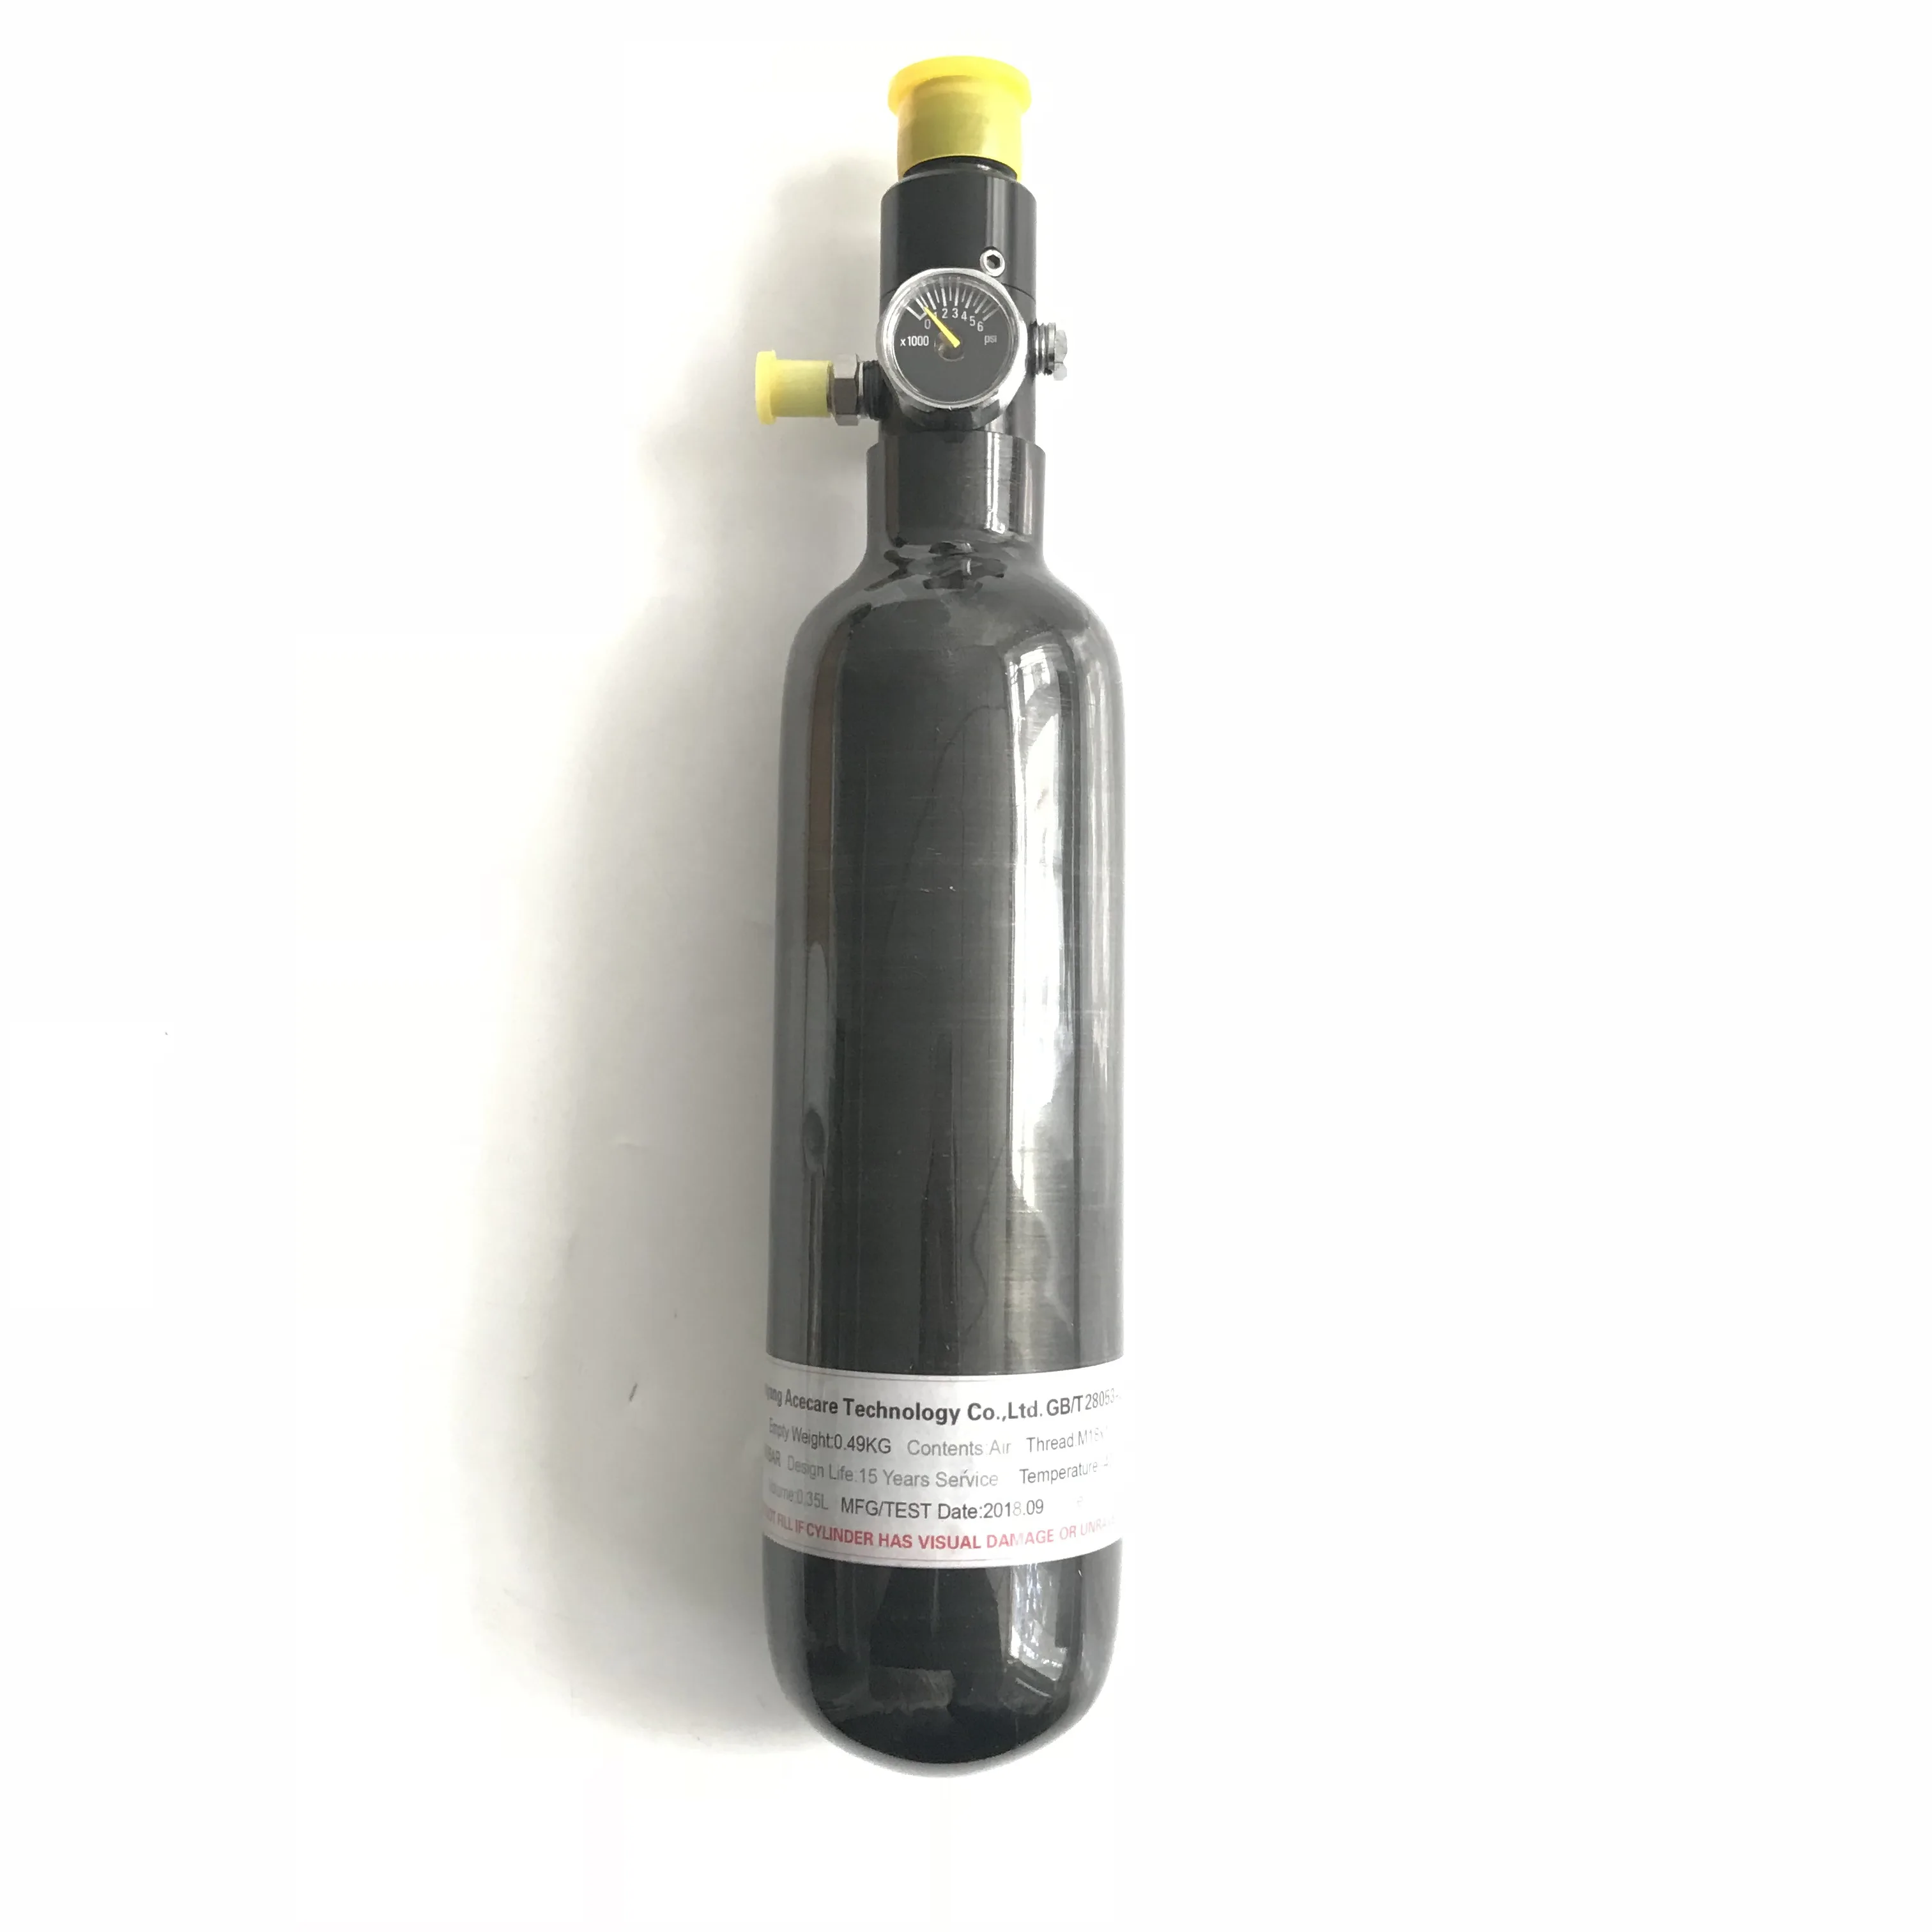 

AC303561 Acecare PCP Cylinder 0.35L 4500Psi HPA Paintball Tank Airsoft Air Rifle Airforce Condor Airgun With Regulator Co2 Gun